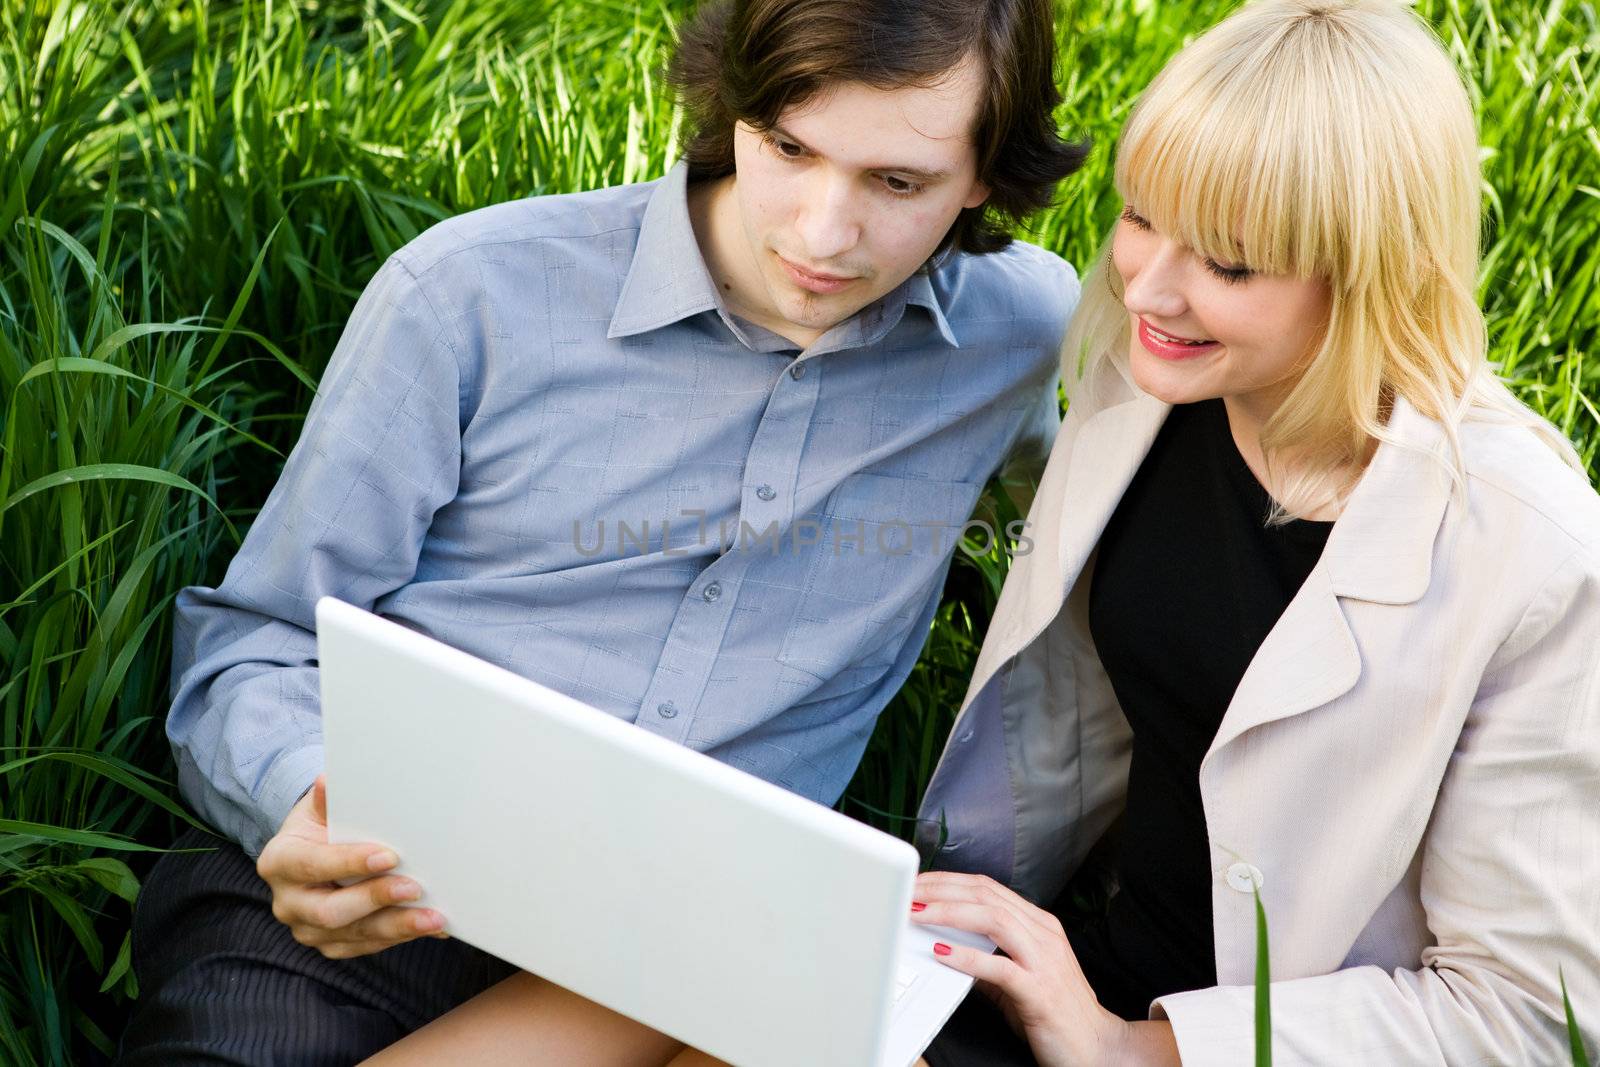 boy and girl sit on the grass and look in laptop